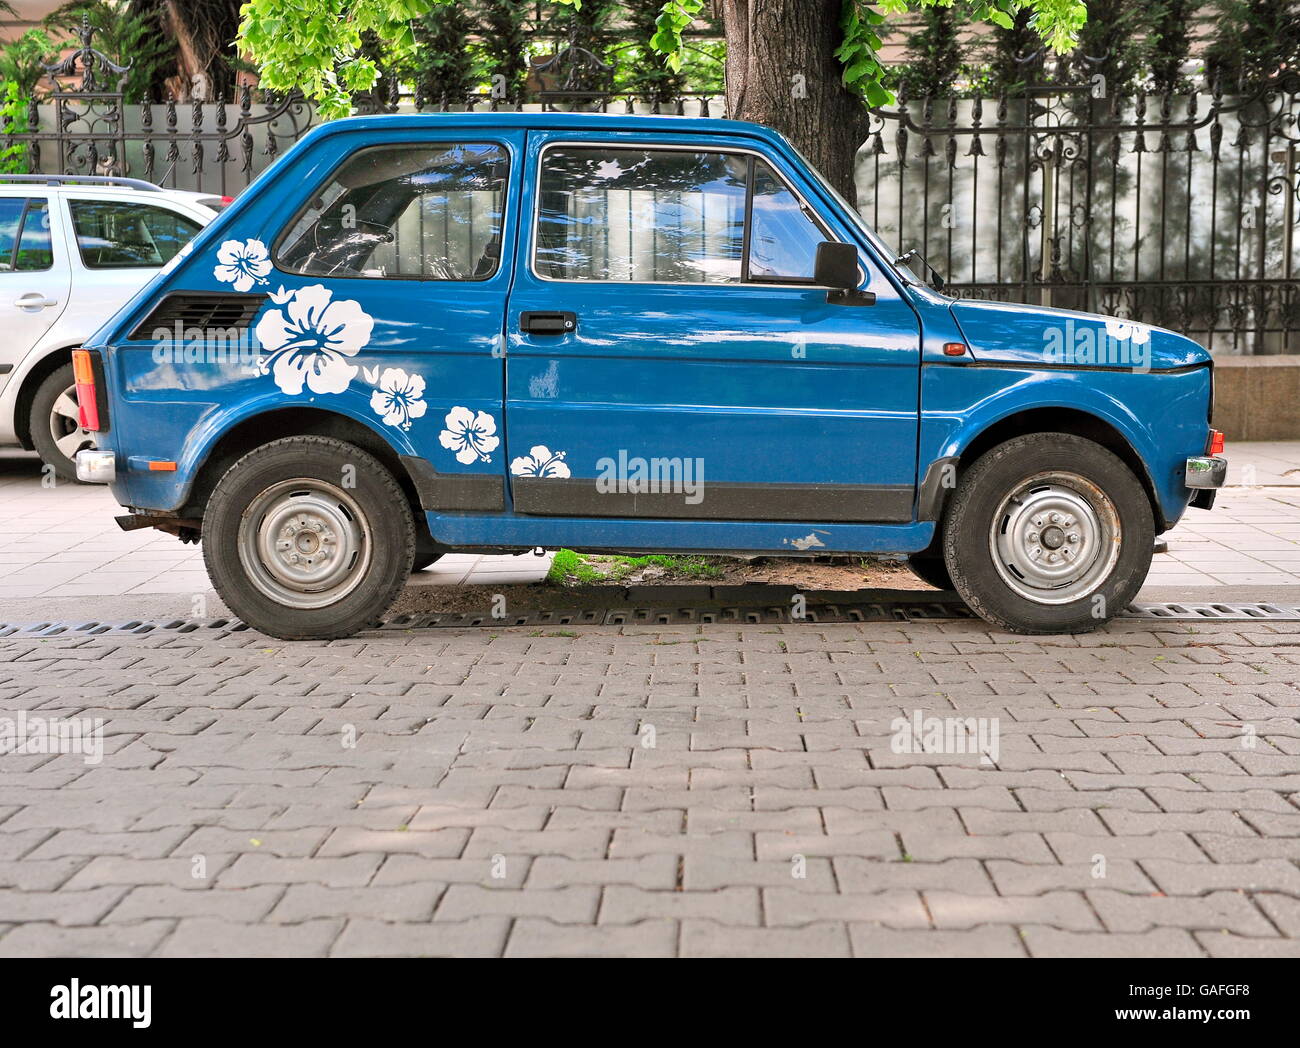 SOFIA, BULGARIA - MAY 5: Old fashioned car in the street of Sofia on May 5, 2016. Stock Photo